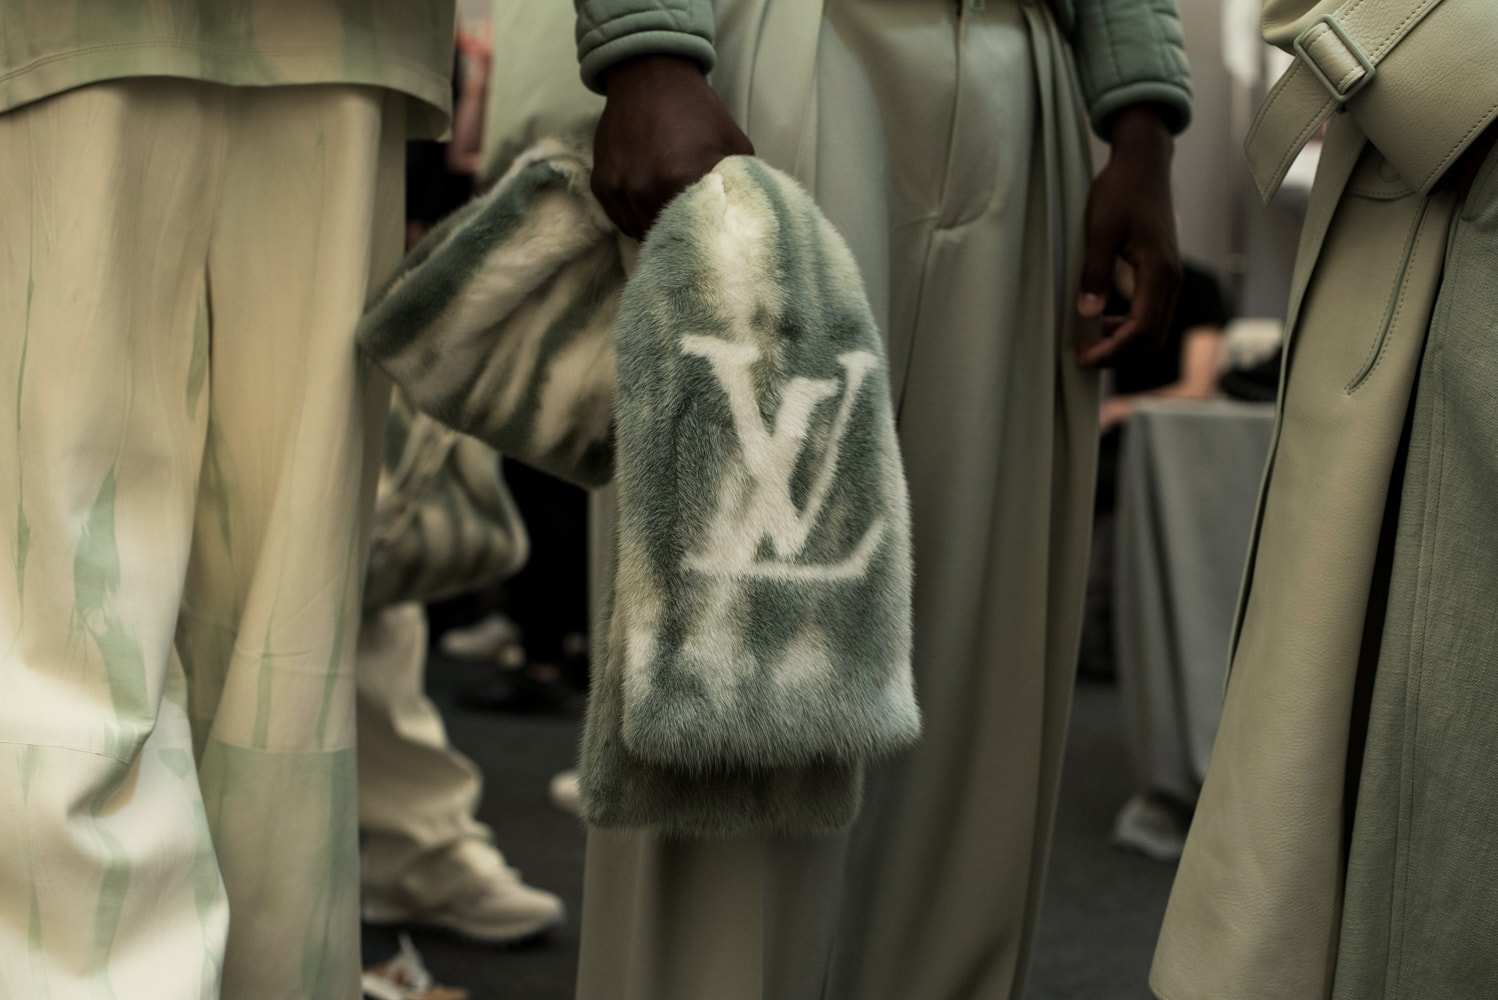 Louis vuitton spring summer 2019 backstage runway show collection virgil abloh debut premiere first accessories bags shirt tee coat fur